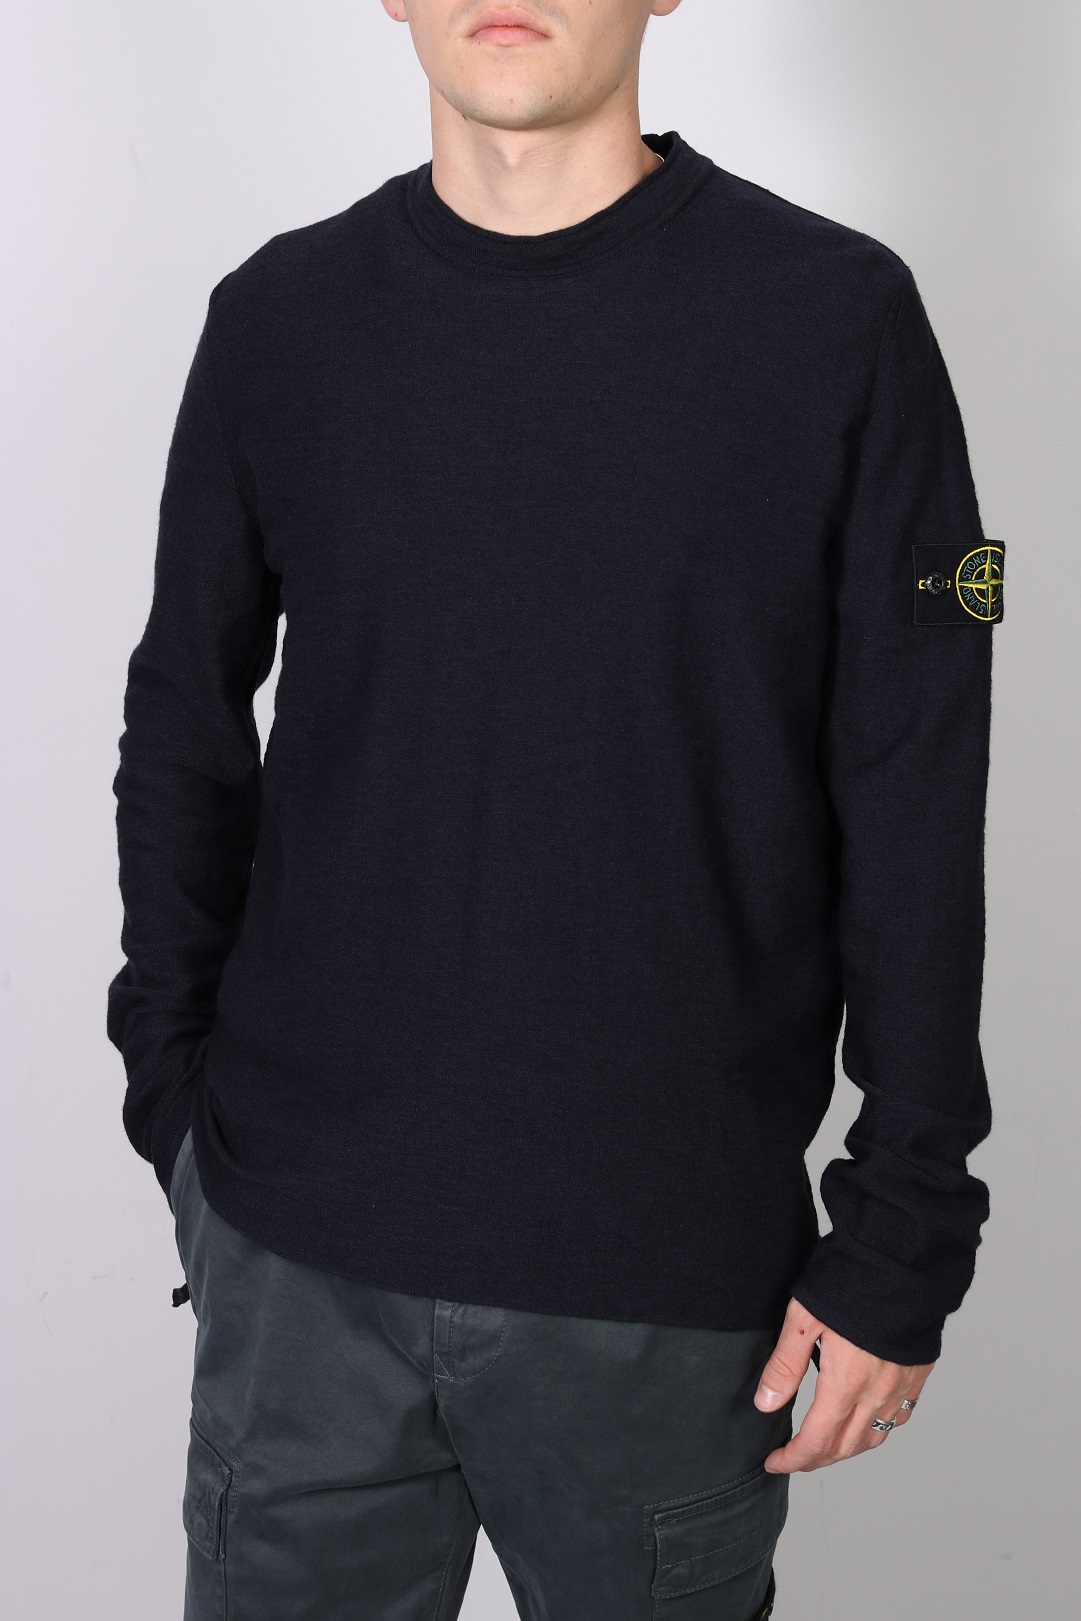 STONE ISLAND Knit Pullover in Navy Blue 2XL